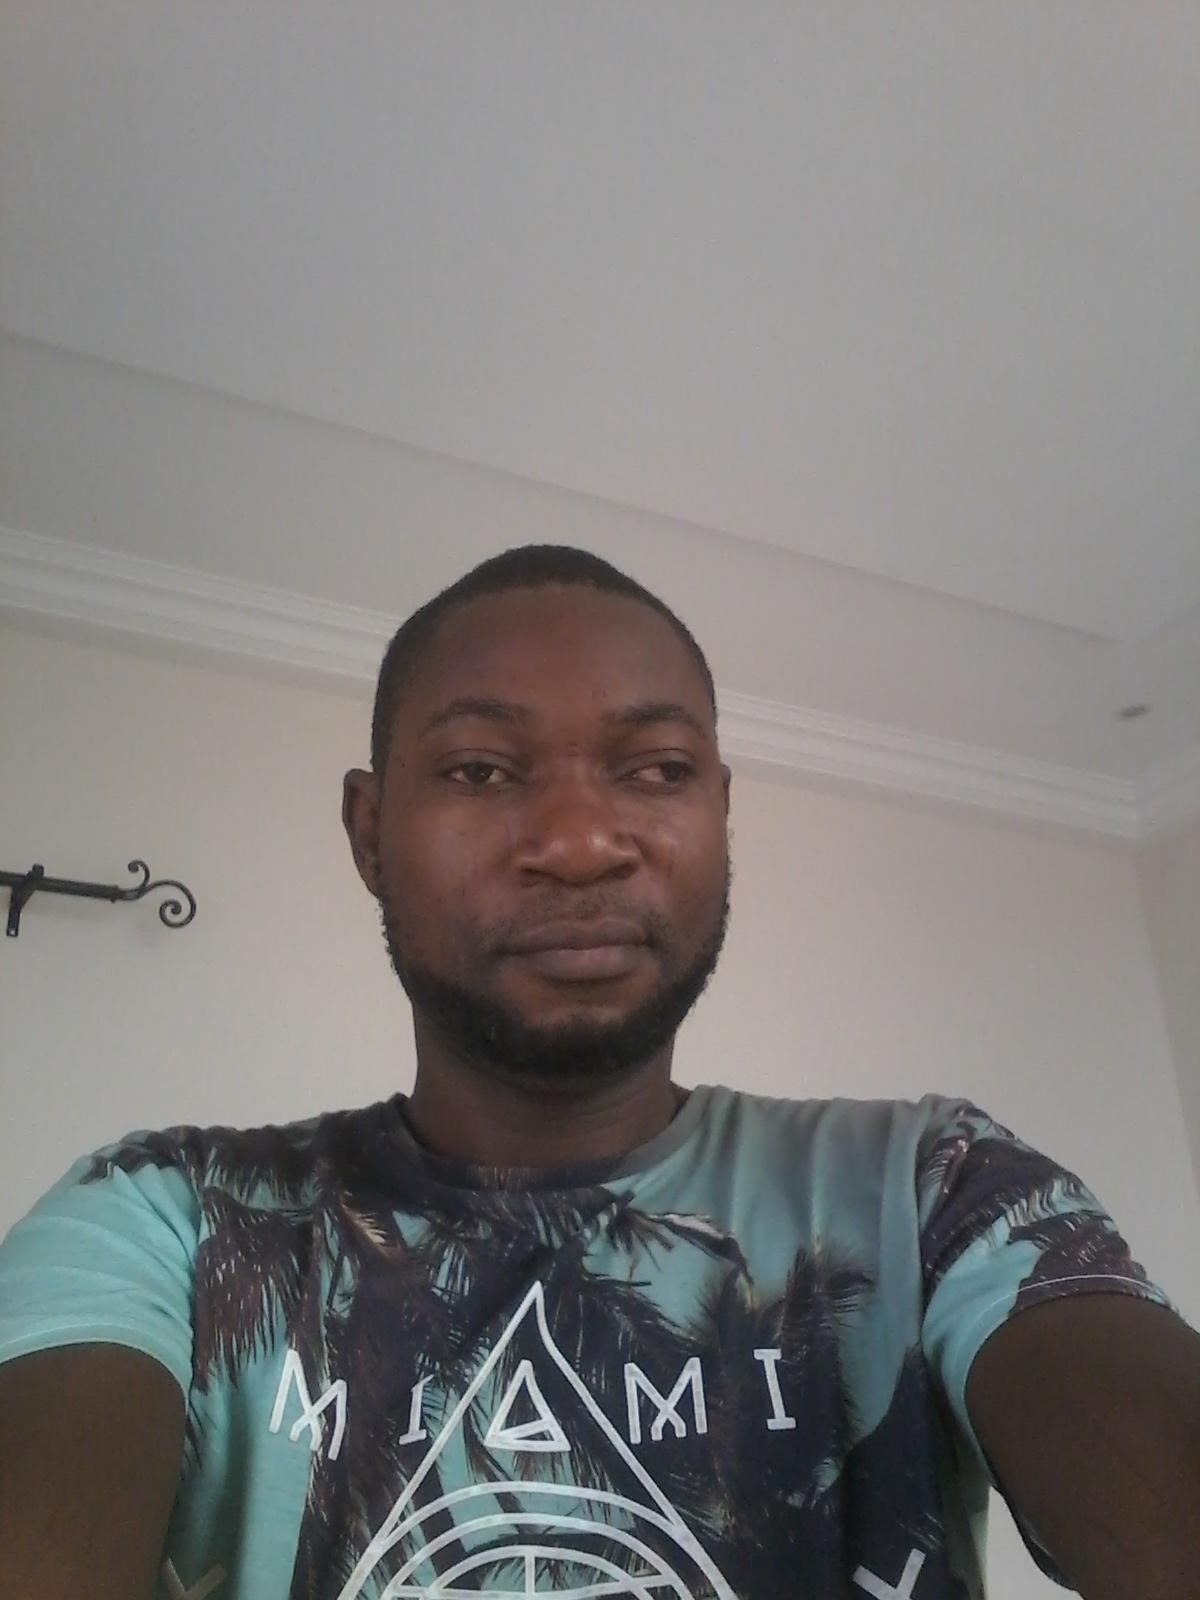 Second Image of Ayobami13. Am cool headed guy